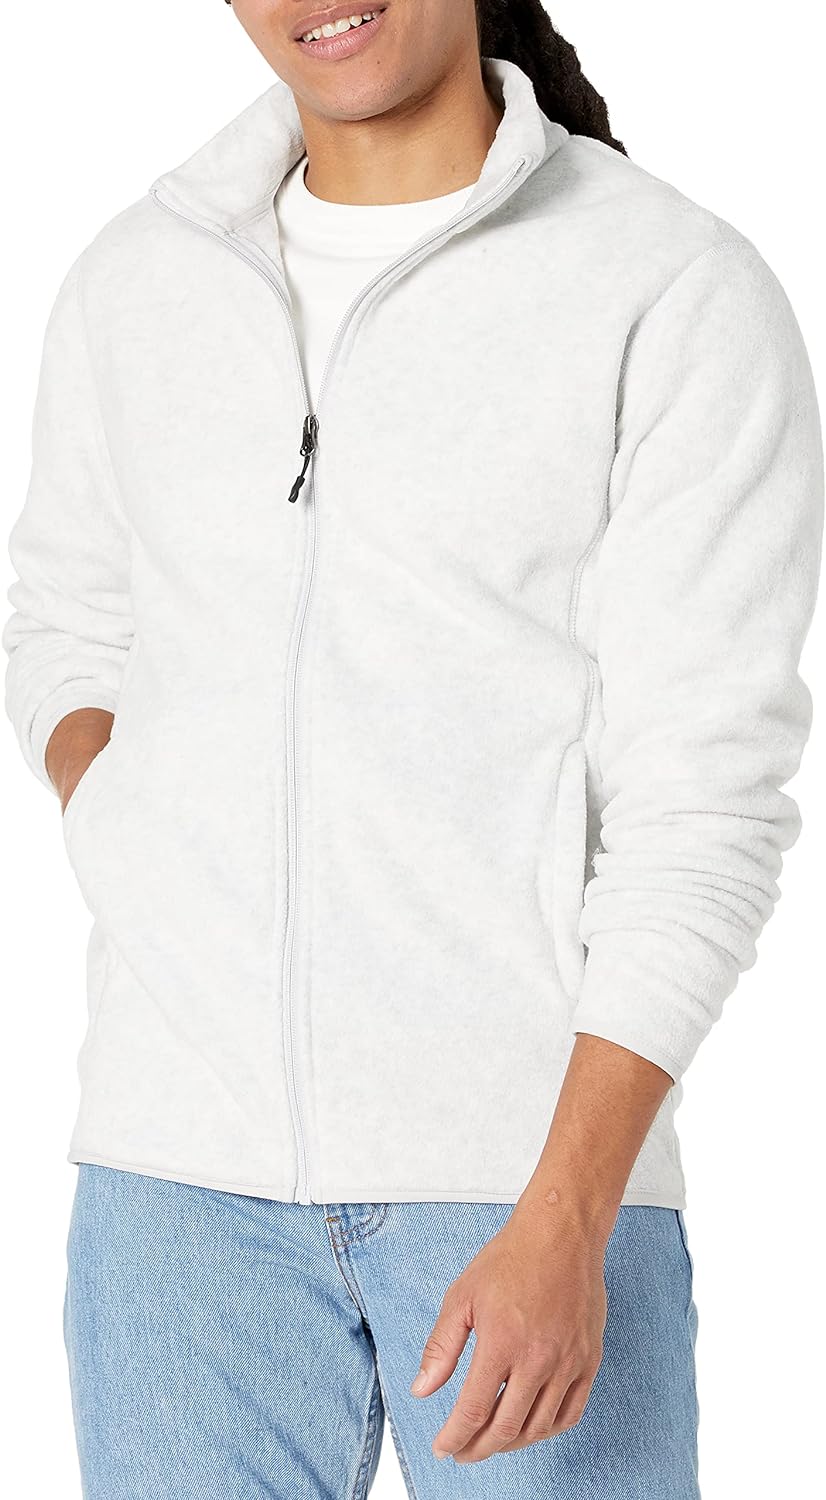 Limited-time deal: Amazon Essentials Men's Full-Zip Fleece Jacket (Available in Big & Tall) - $8.90